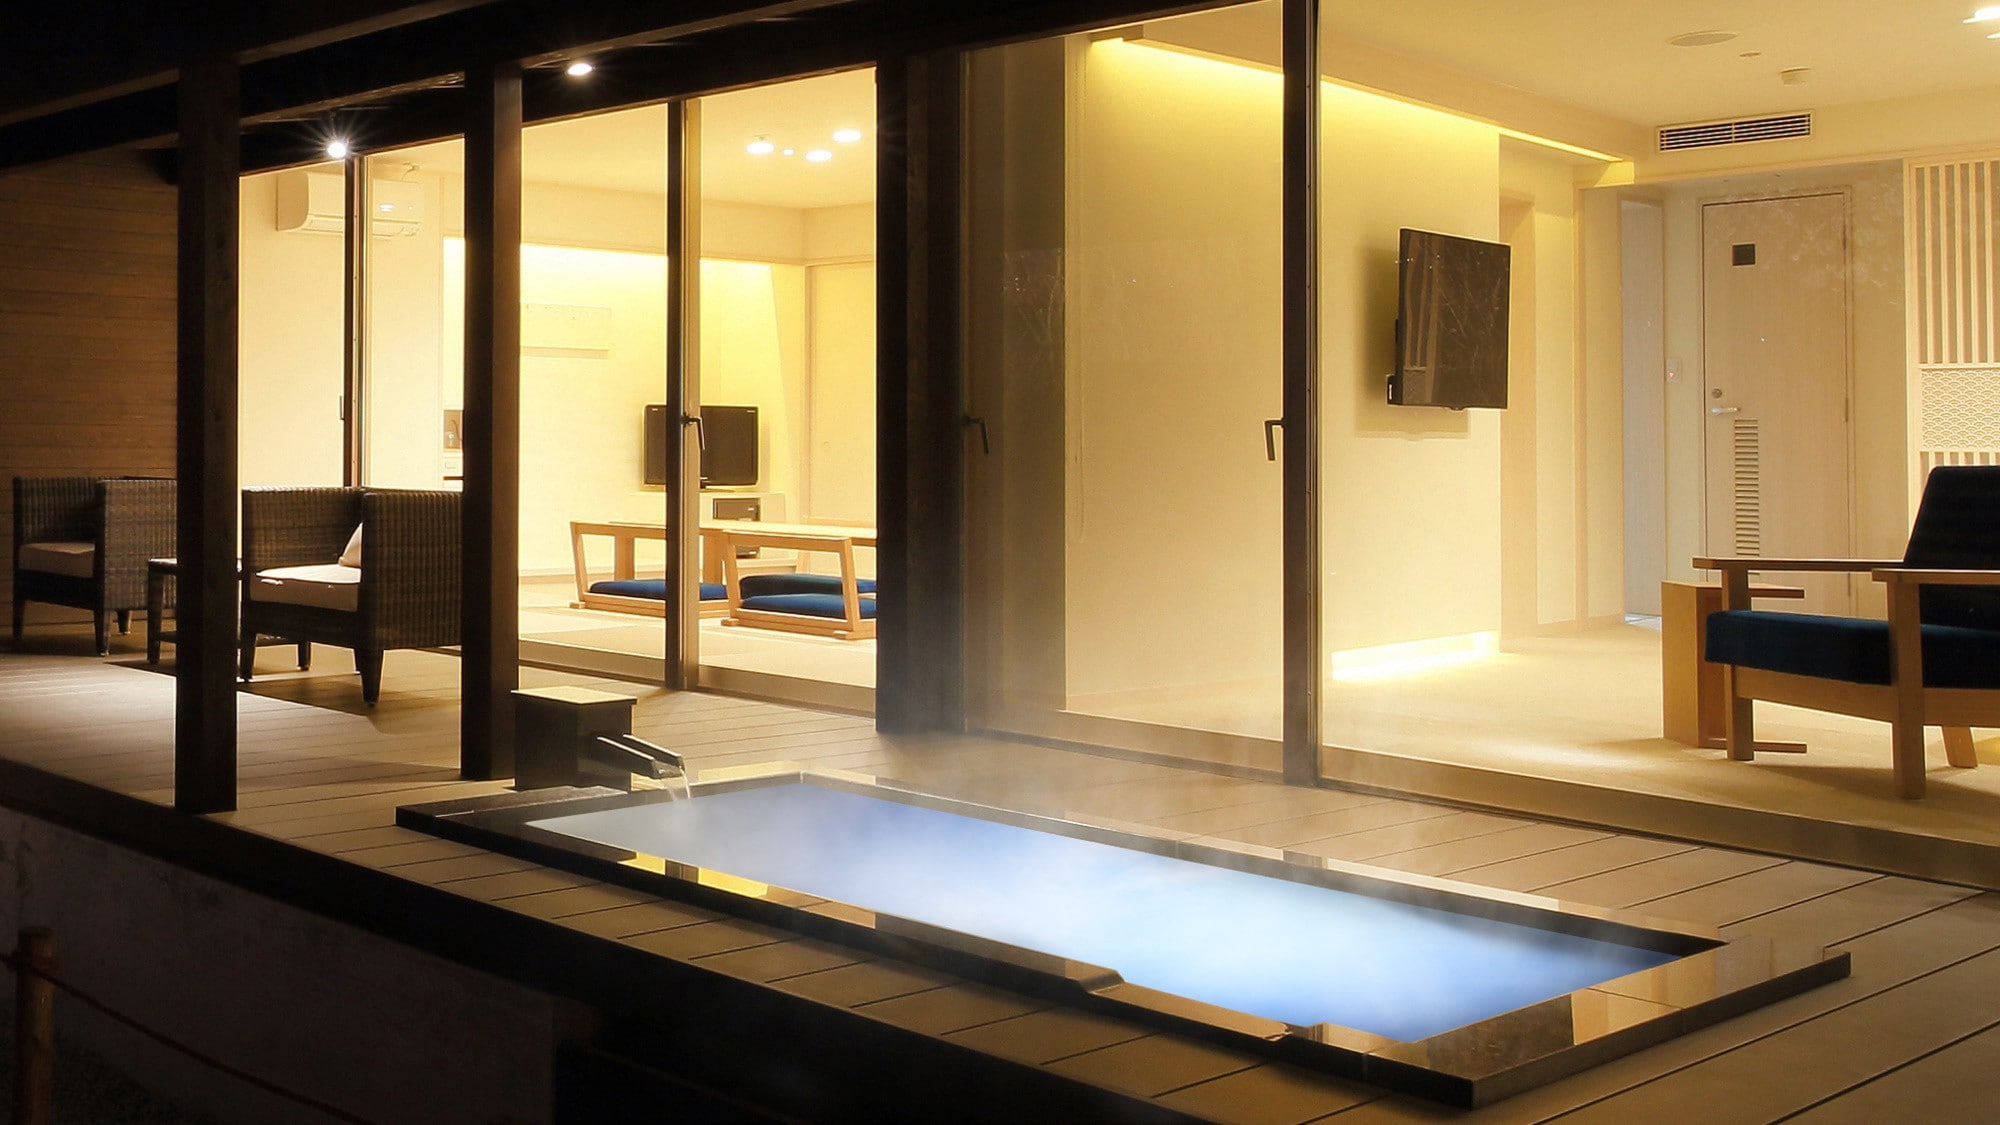 "Seika-Seika-" A view of the room from the open-air bath. With a fantastic light